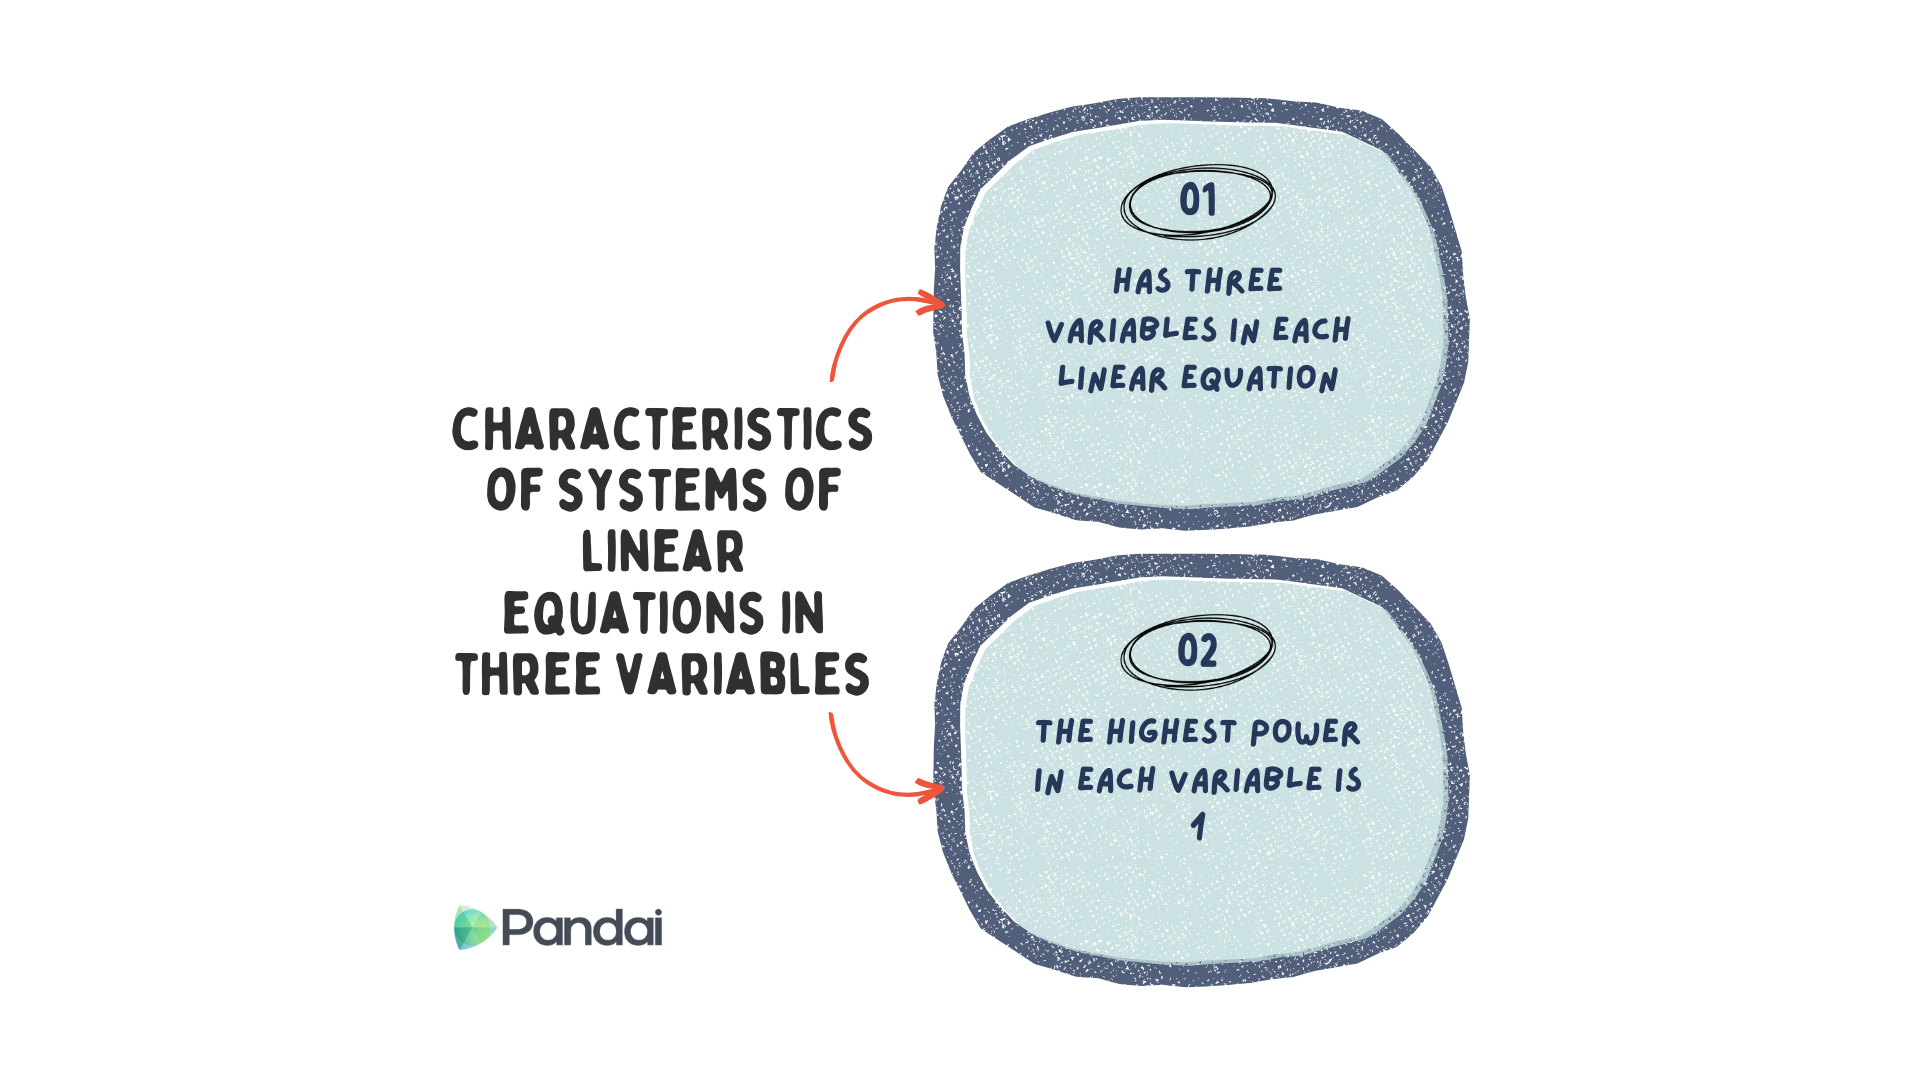 Visual representation of characteristics of systems of linear equations in three variables